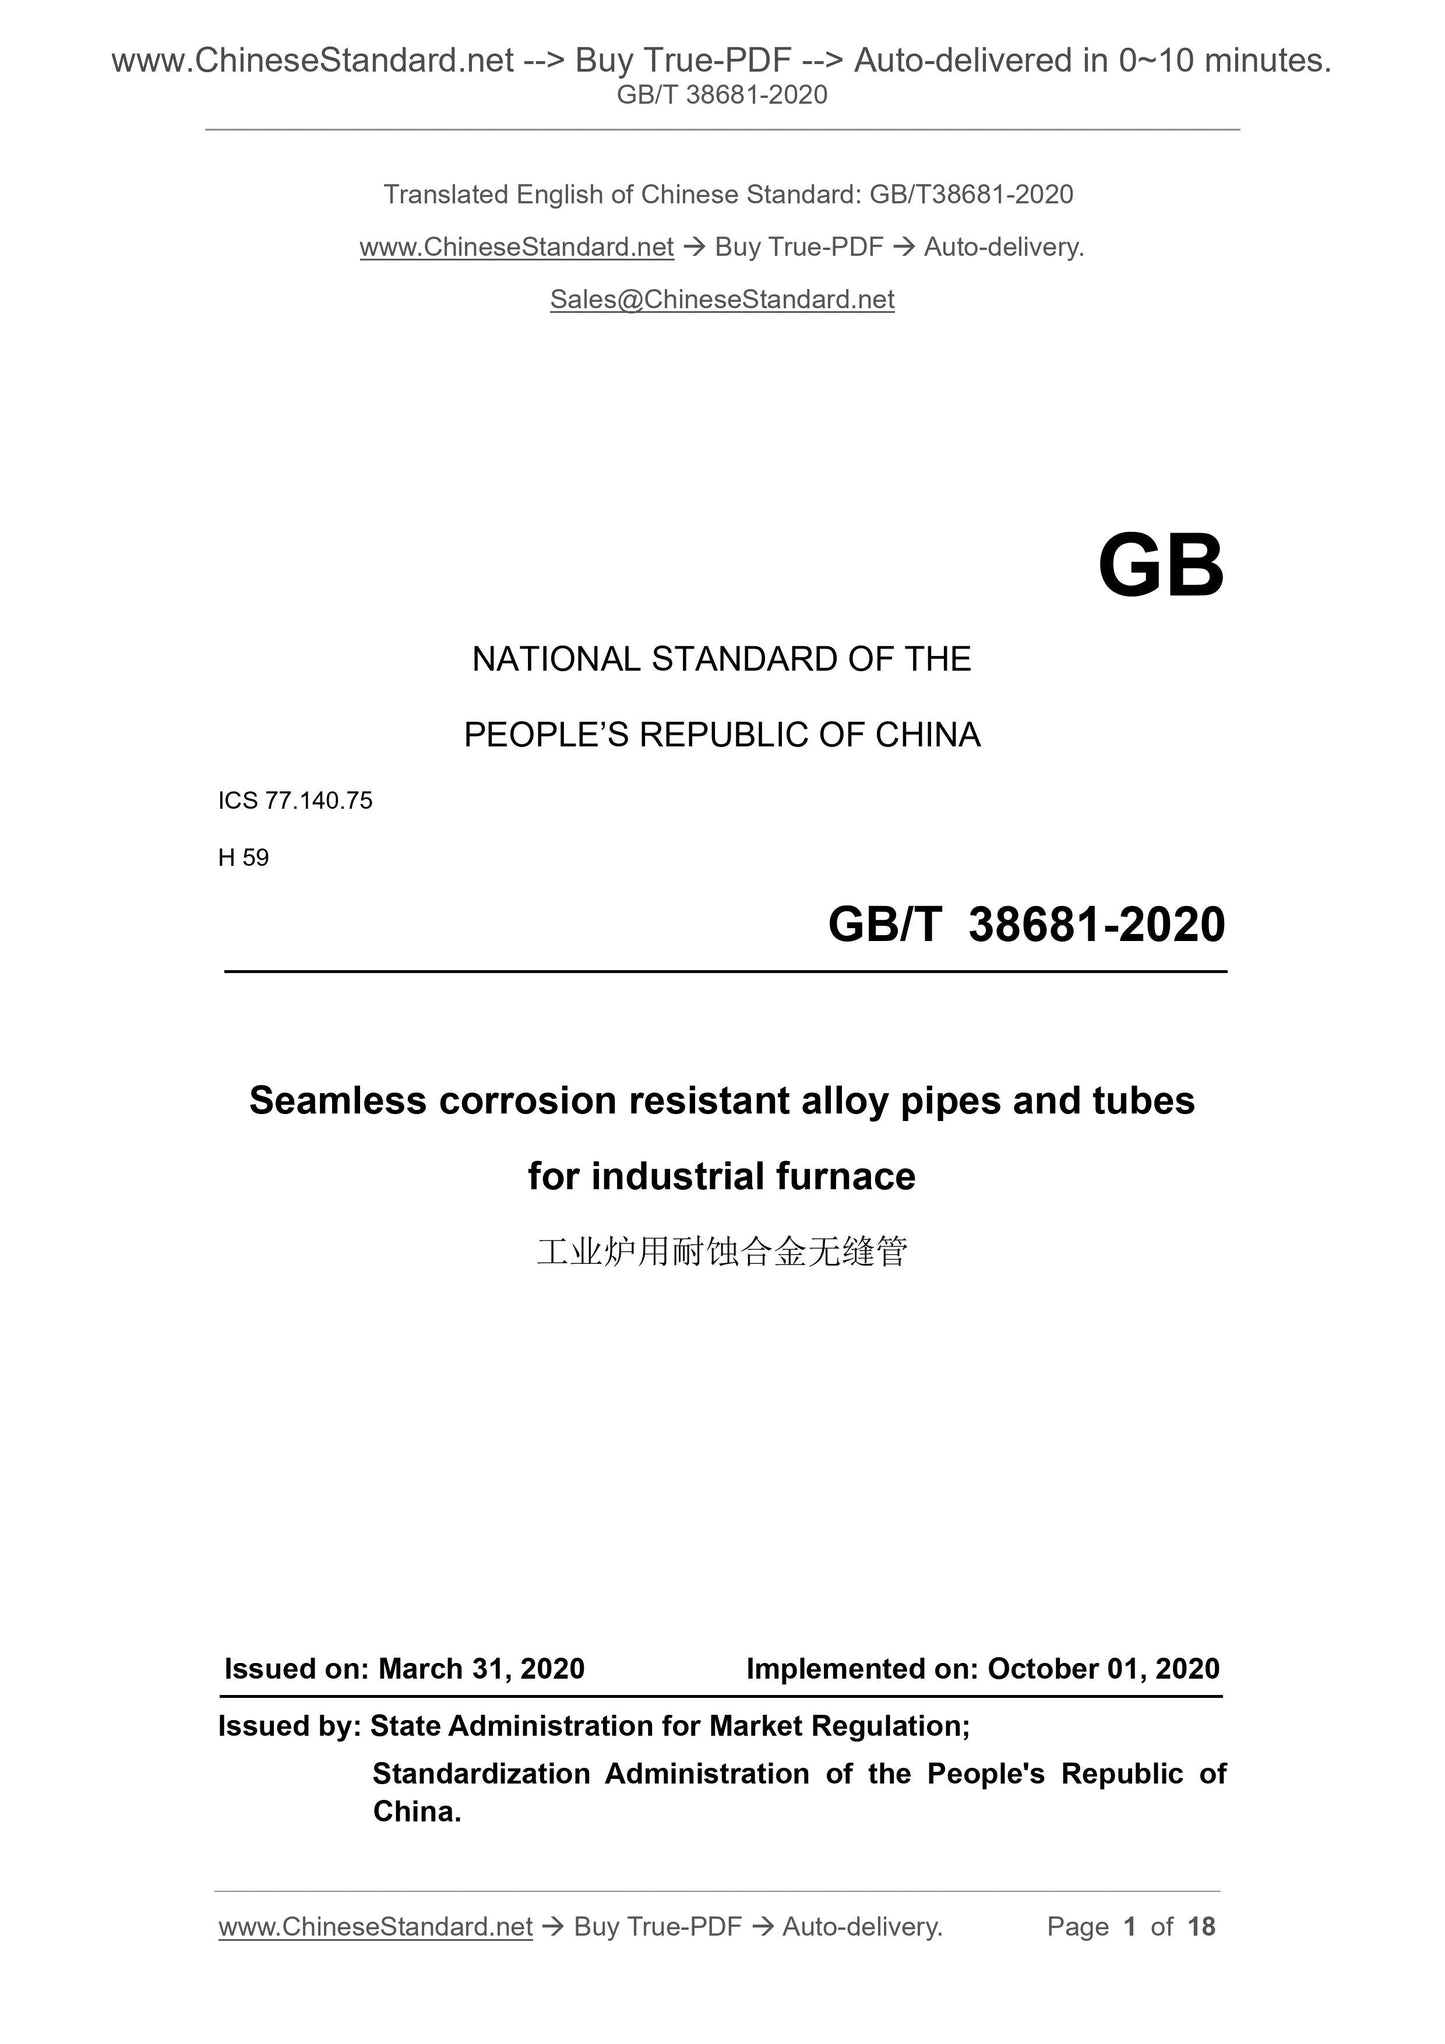 GB/T 38681-2020 Page 1